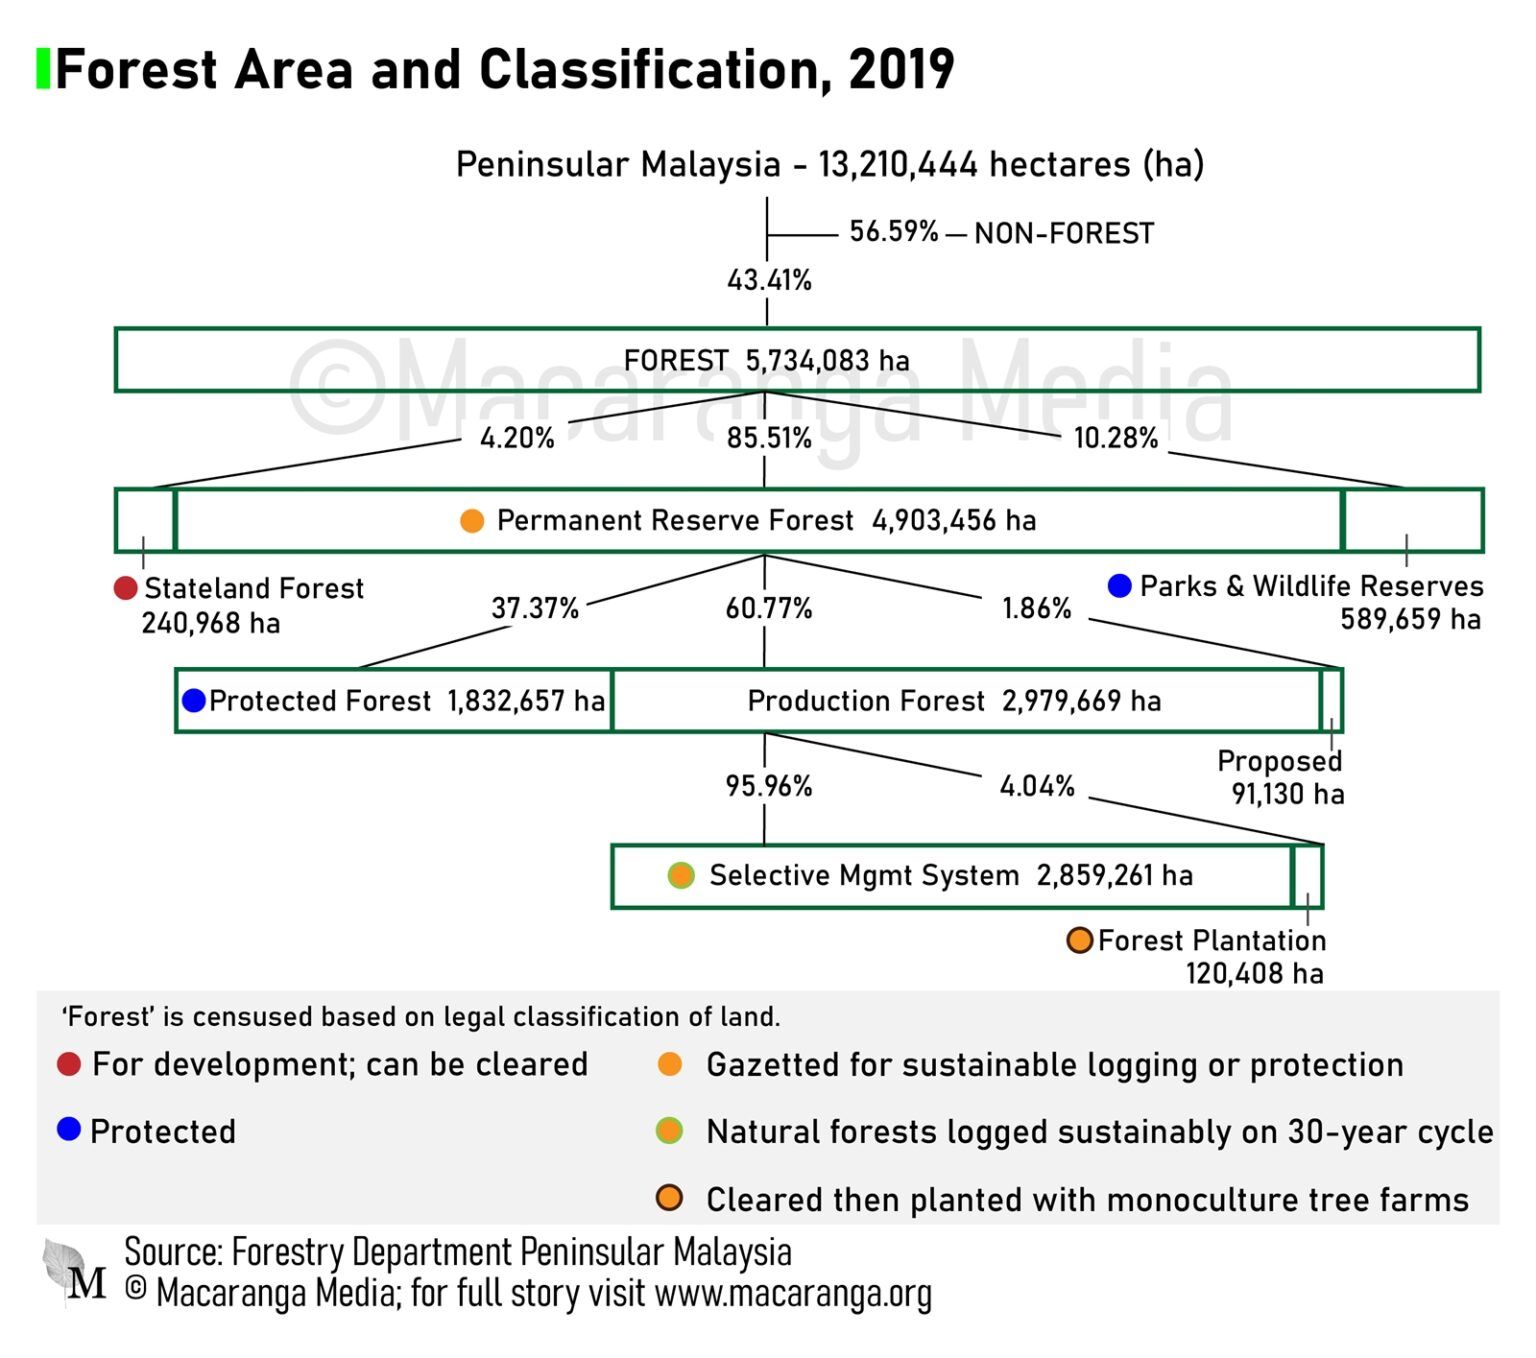 Figure 3: Forest area in Peninsular Malaysia according to classification, 2019.